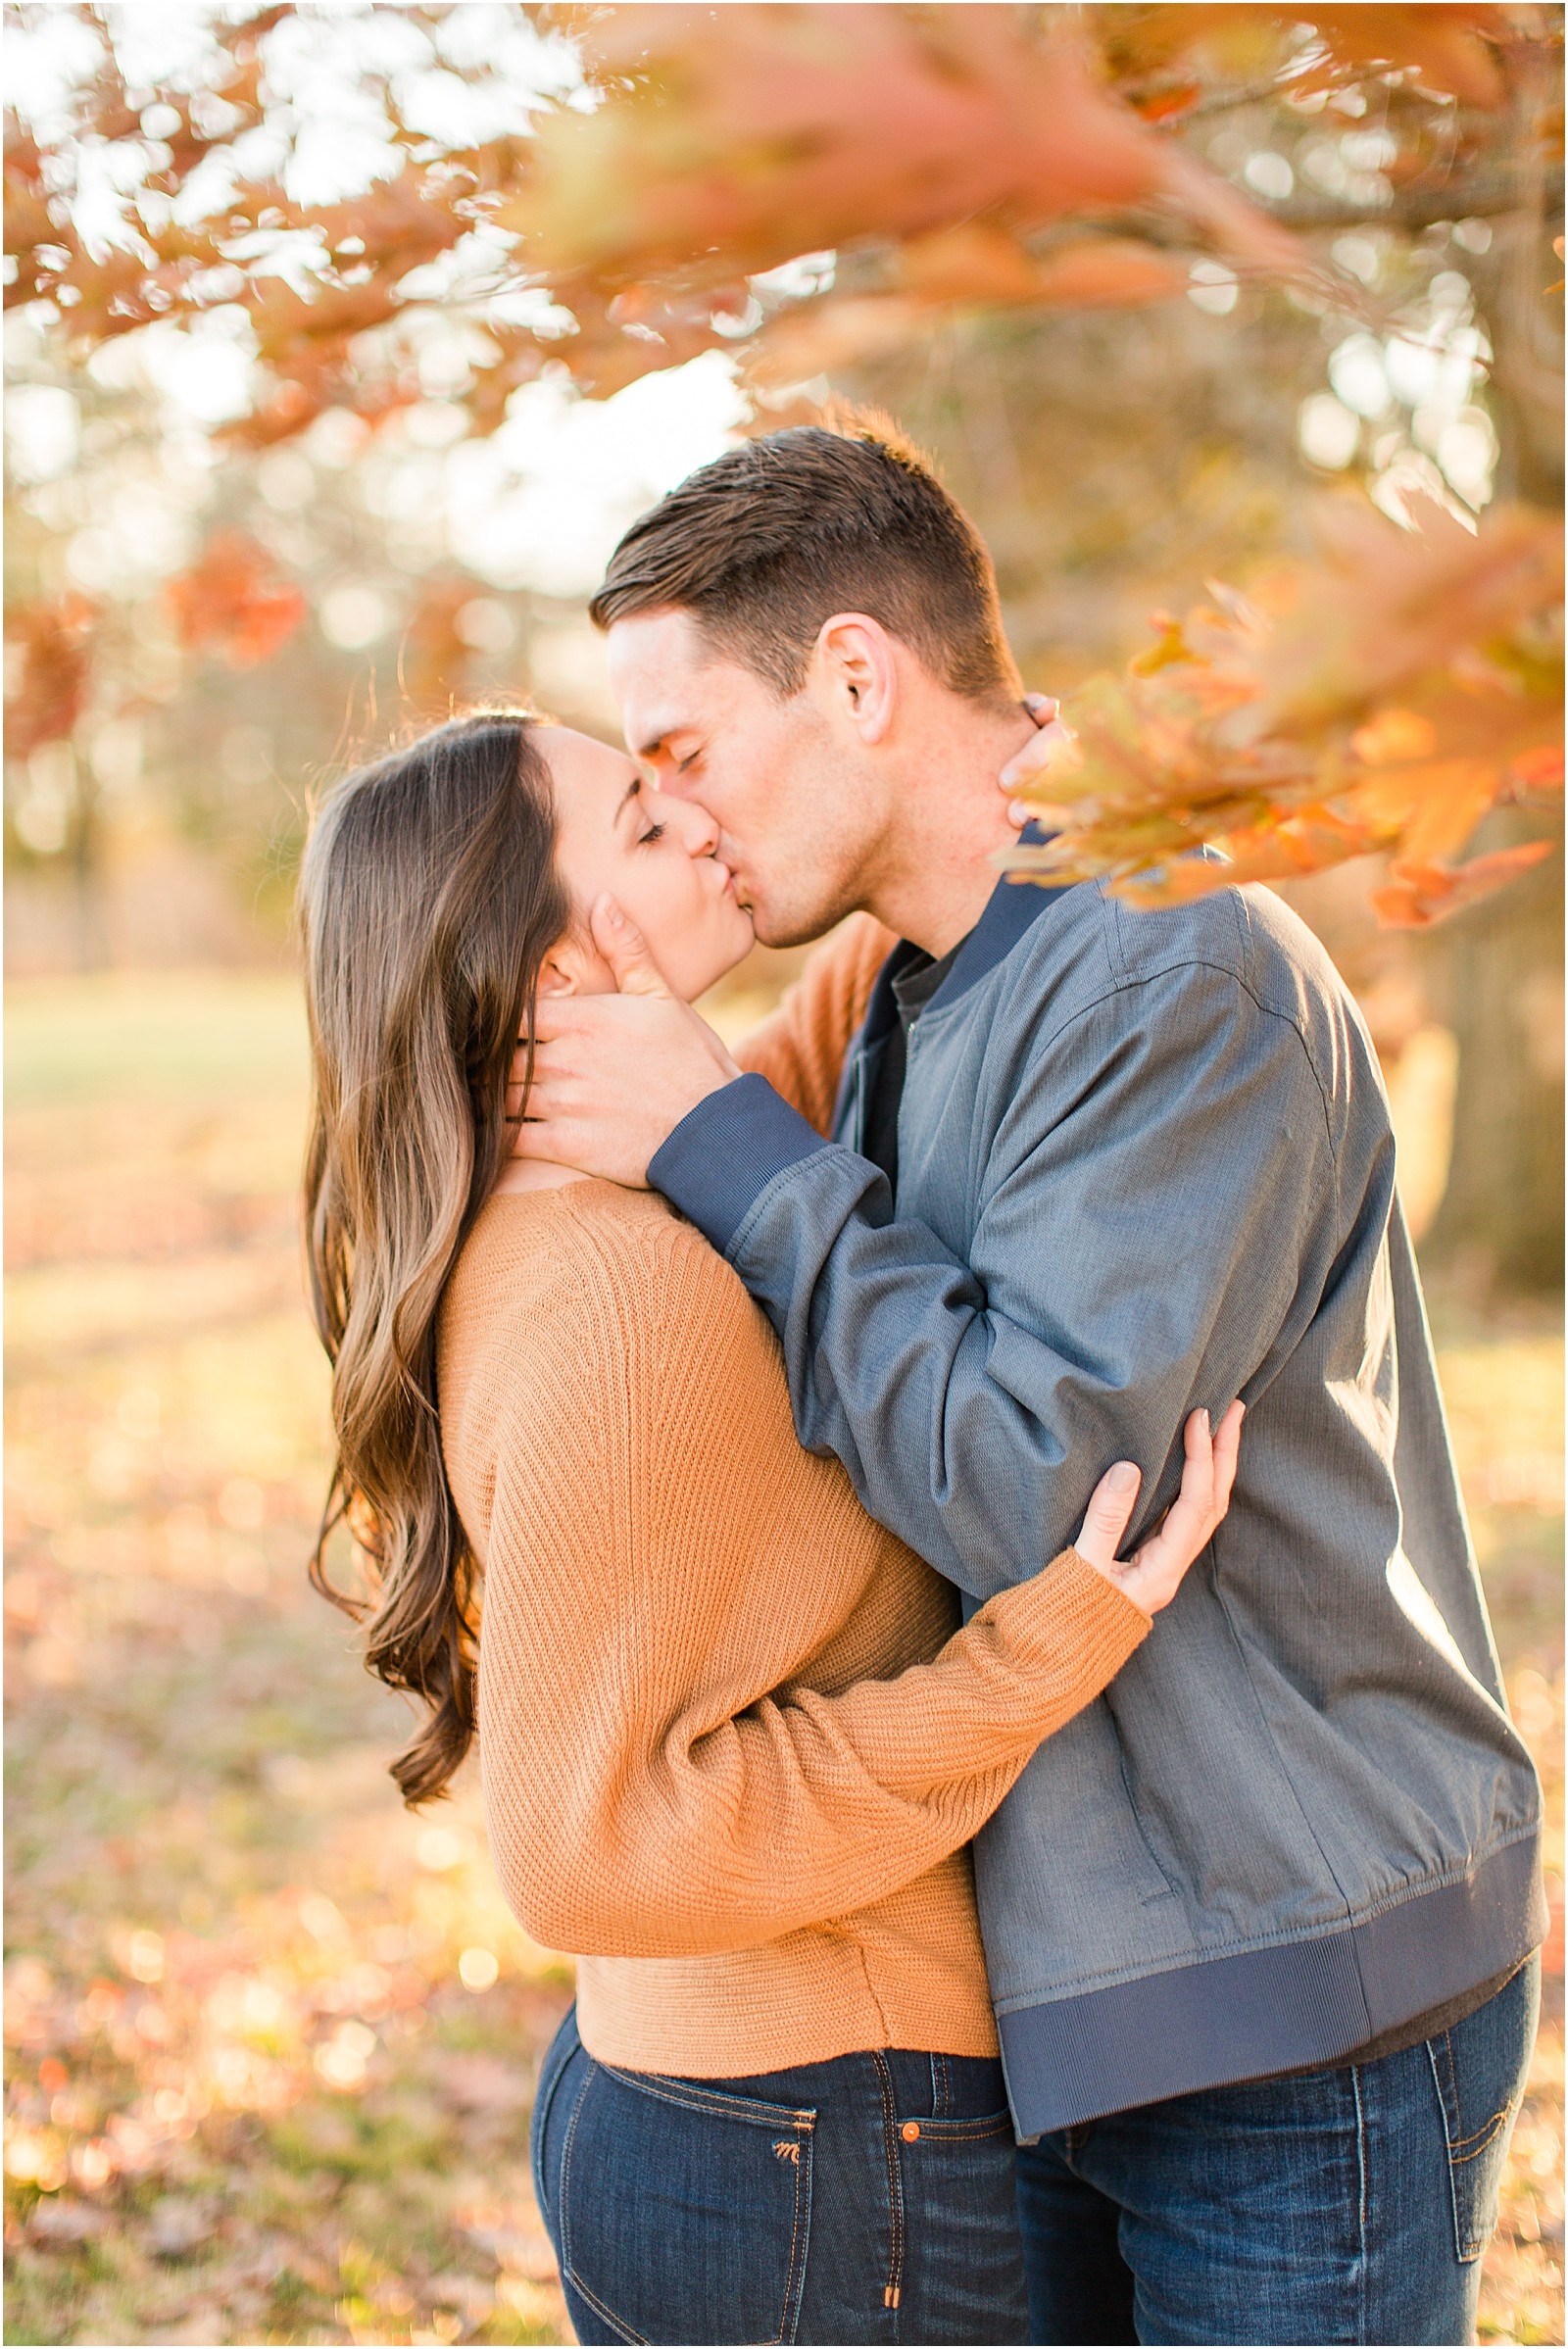 Kaley and Devon's fall Evansville Indiana engagement session. | #fallengagementsession #evansvilleindiana #evansvilleindianawedding | 0032.jpg